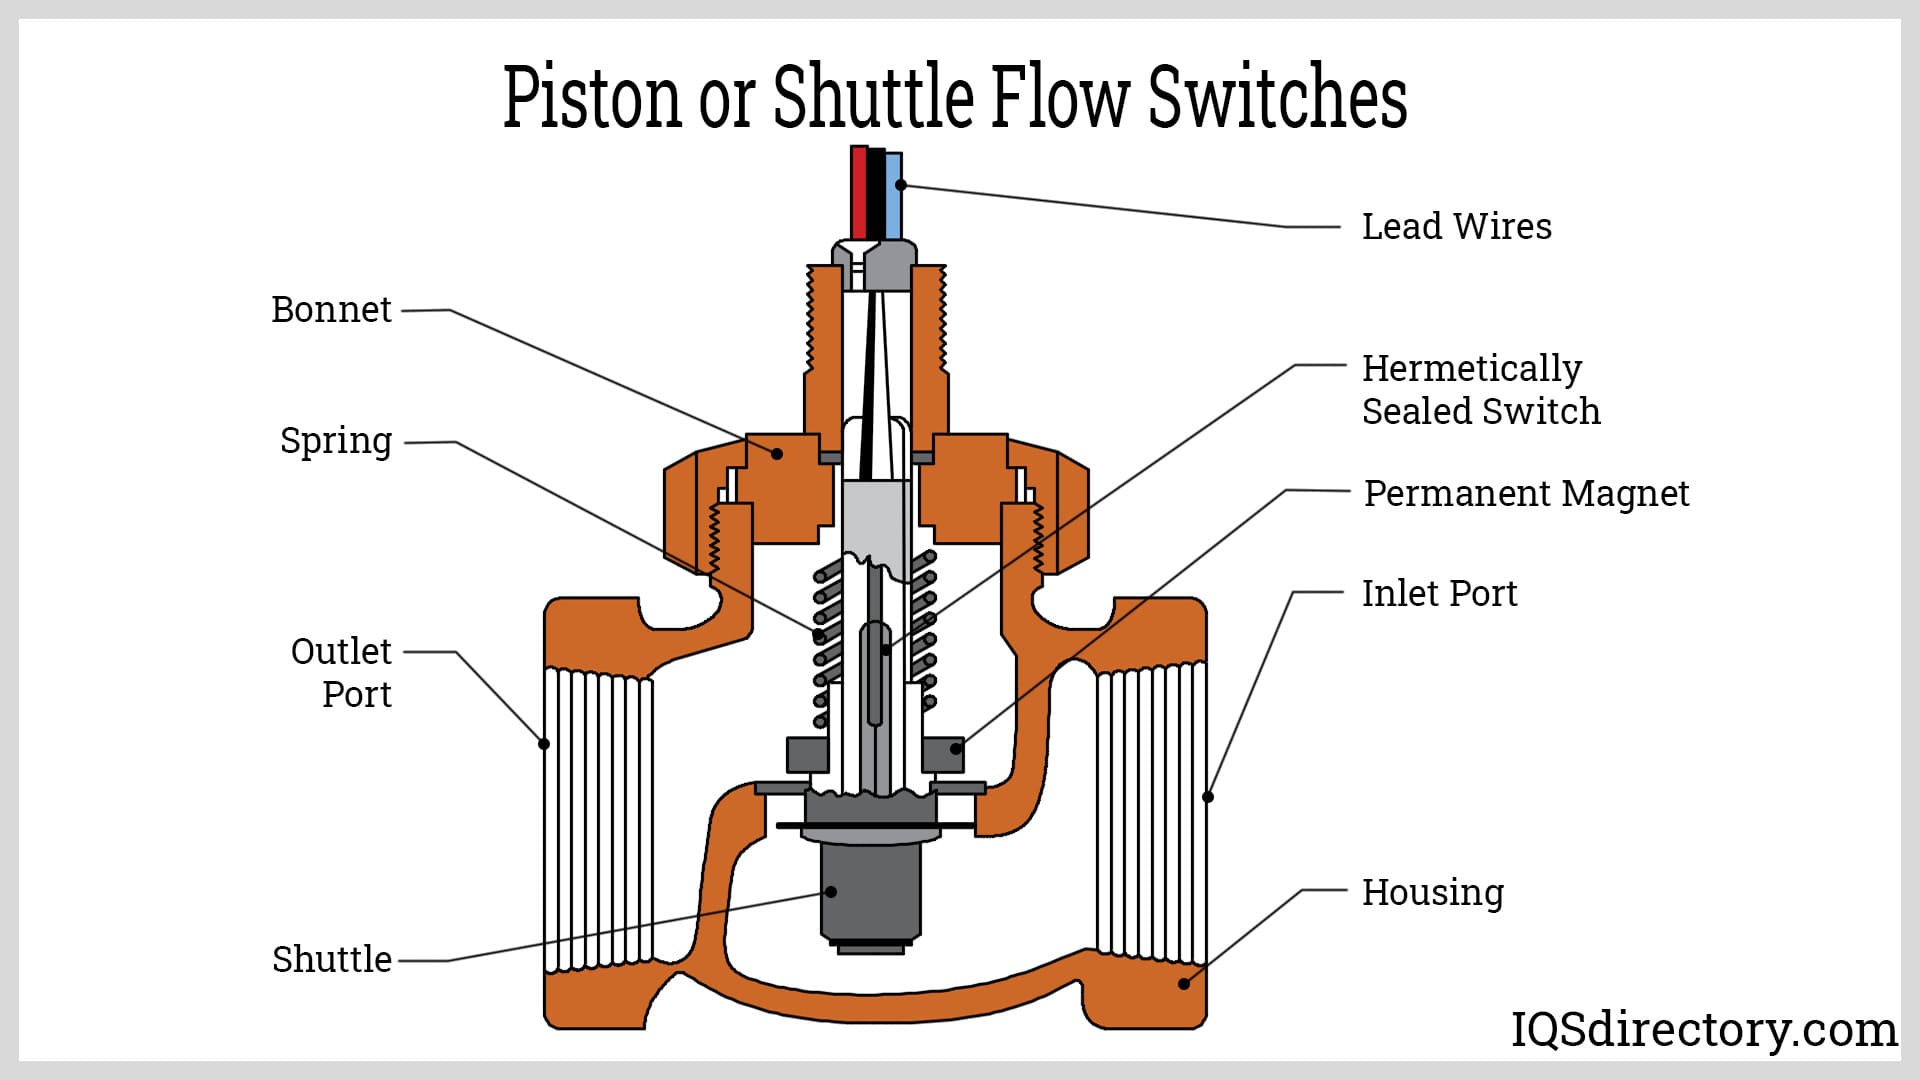 Piston or Shuttle Flow Switches